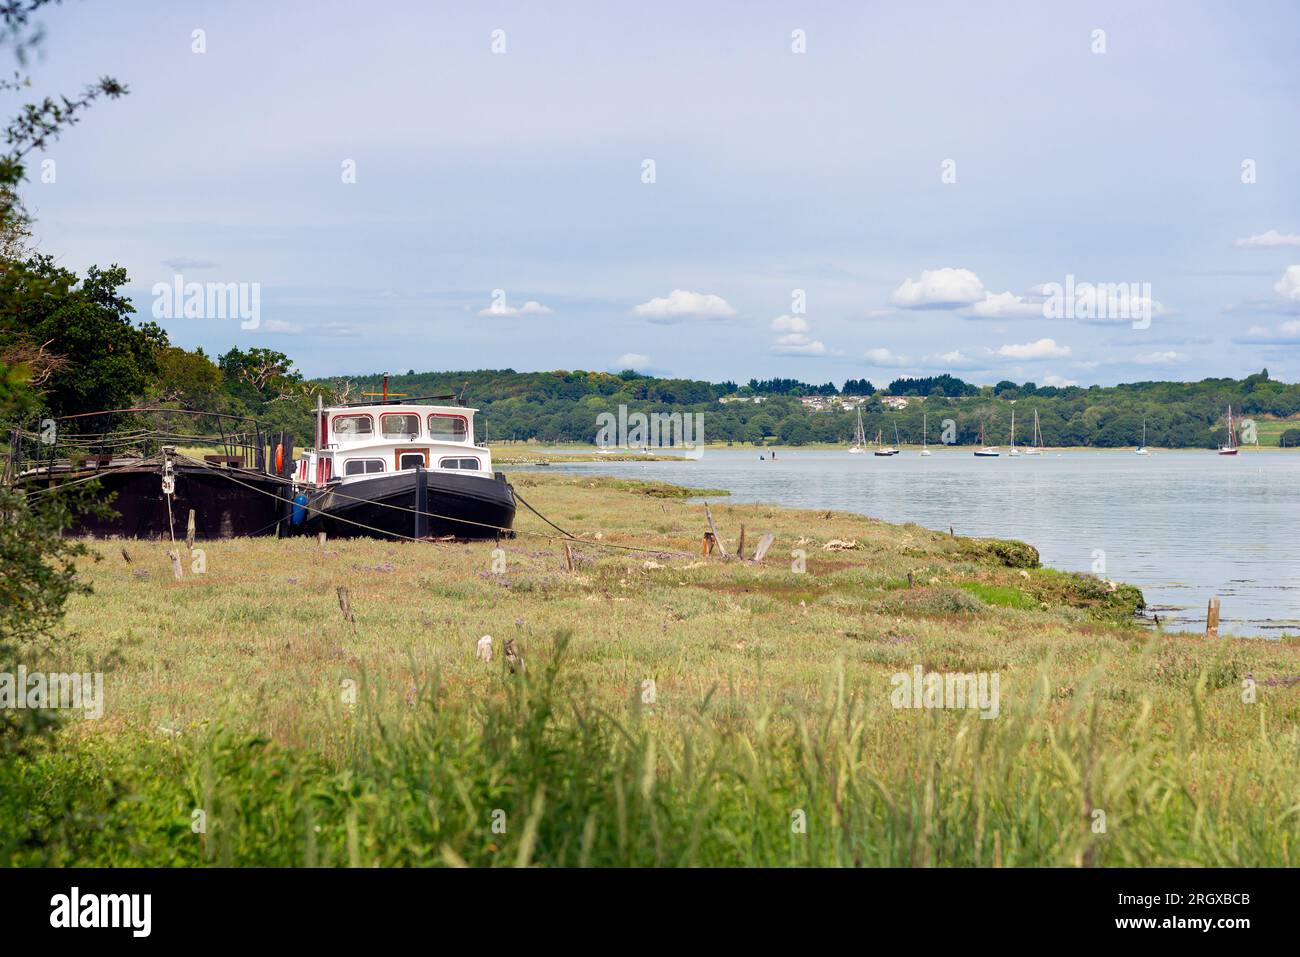 Houseboat near the picturesque village of Pin Mill on the tidal River Orwell during summer - Suffolk, East Anglia, England Stock Photo